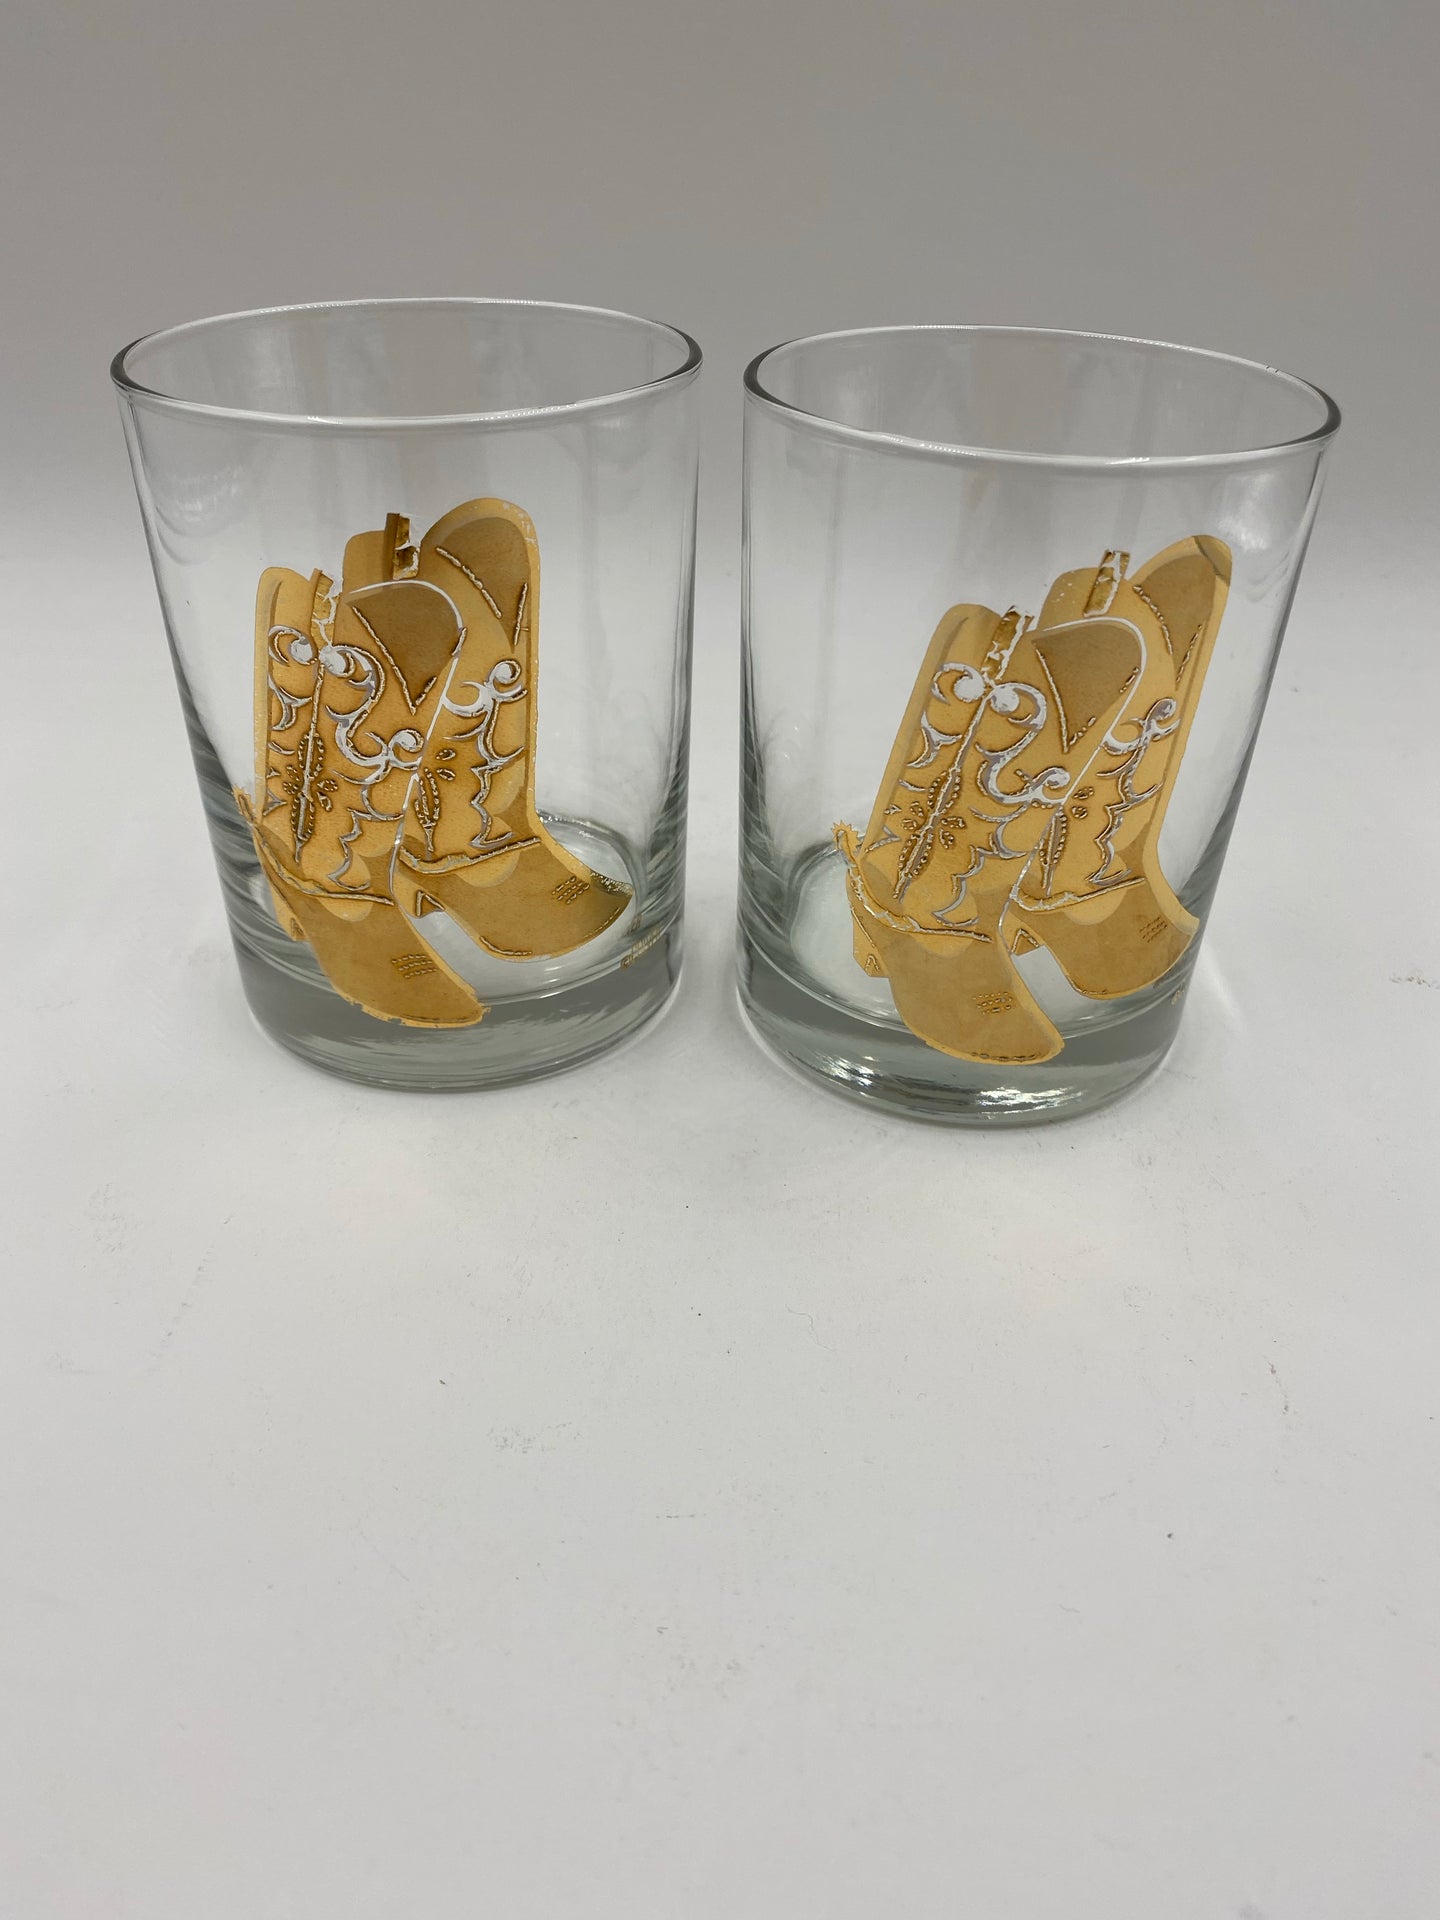 Vintage Culver 22k Gold Cowboy Boot Double Old Fashioned Glasses -A Pair